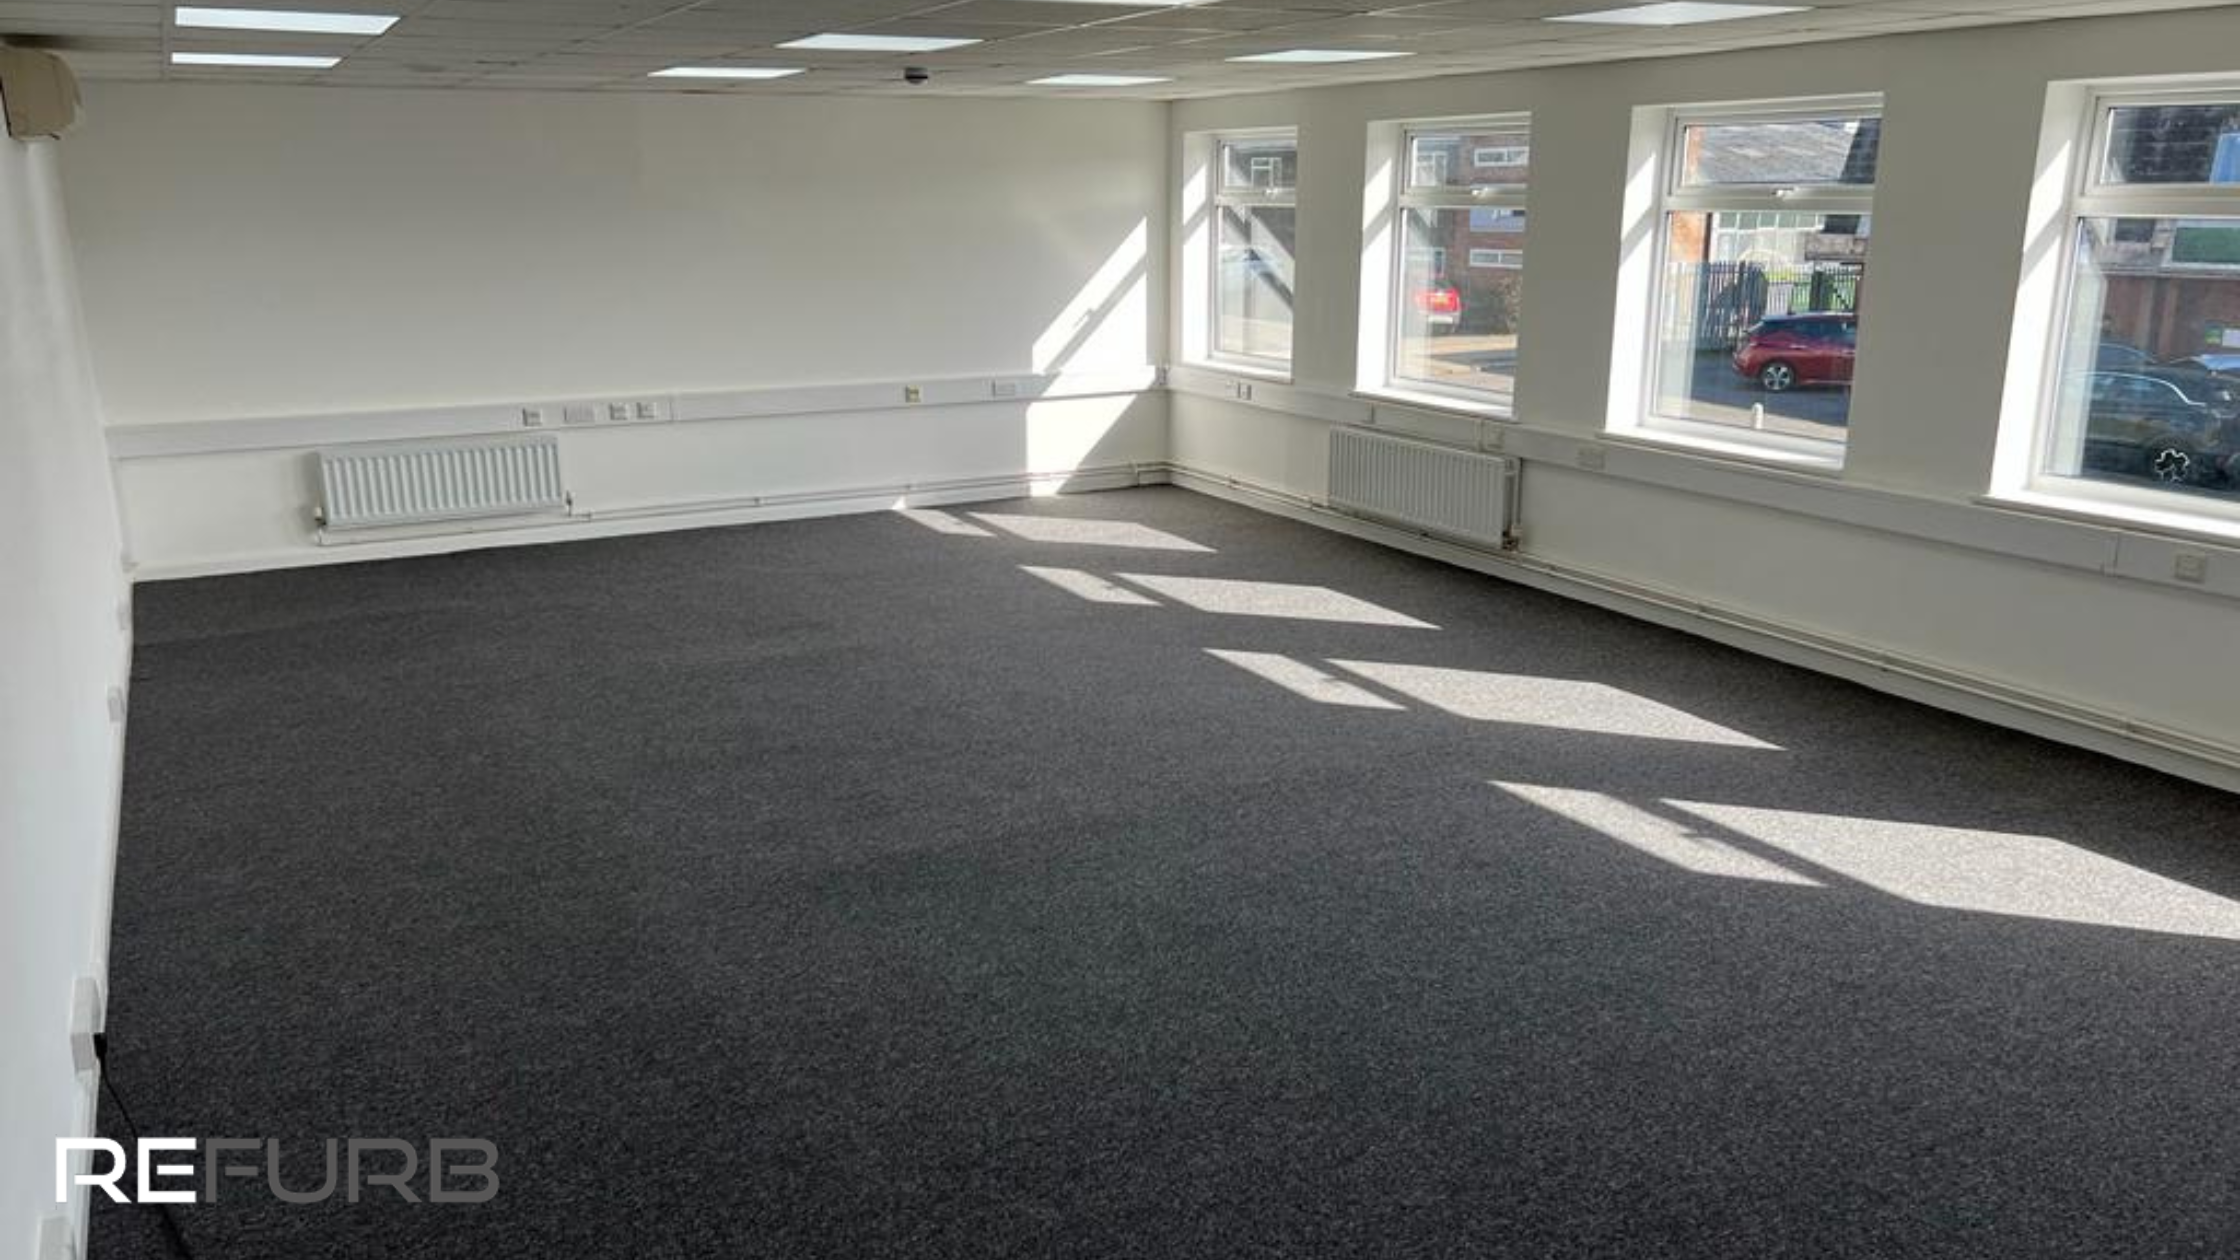 An empty, but freshly refurbished office with light coming through the windows onto the floor.